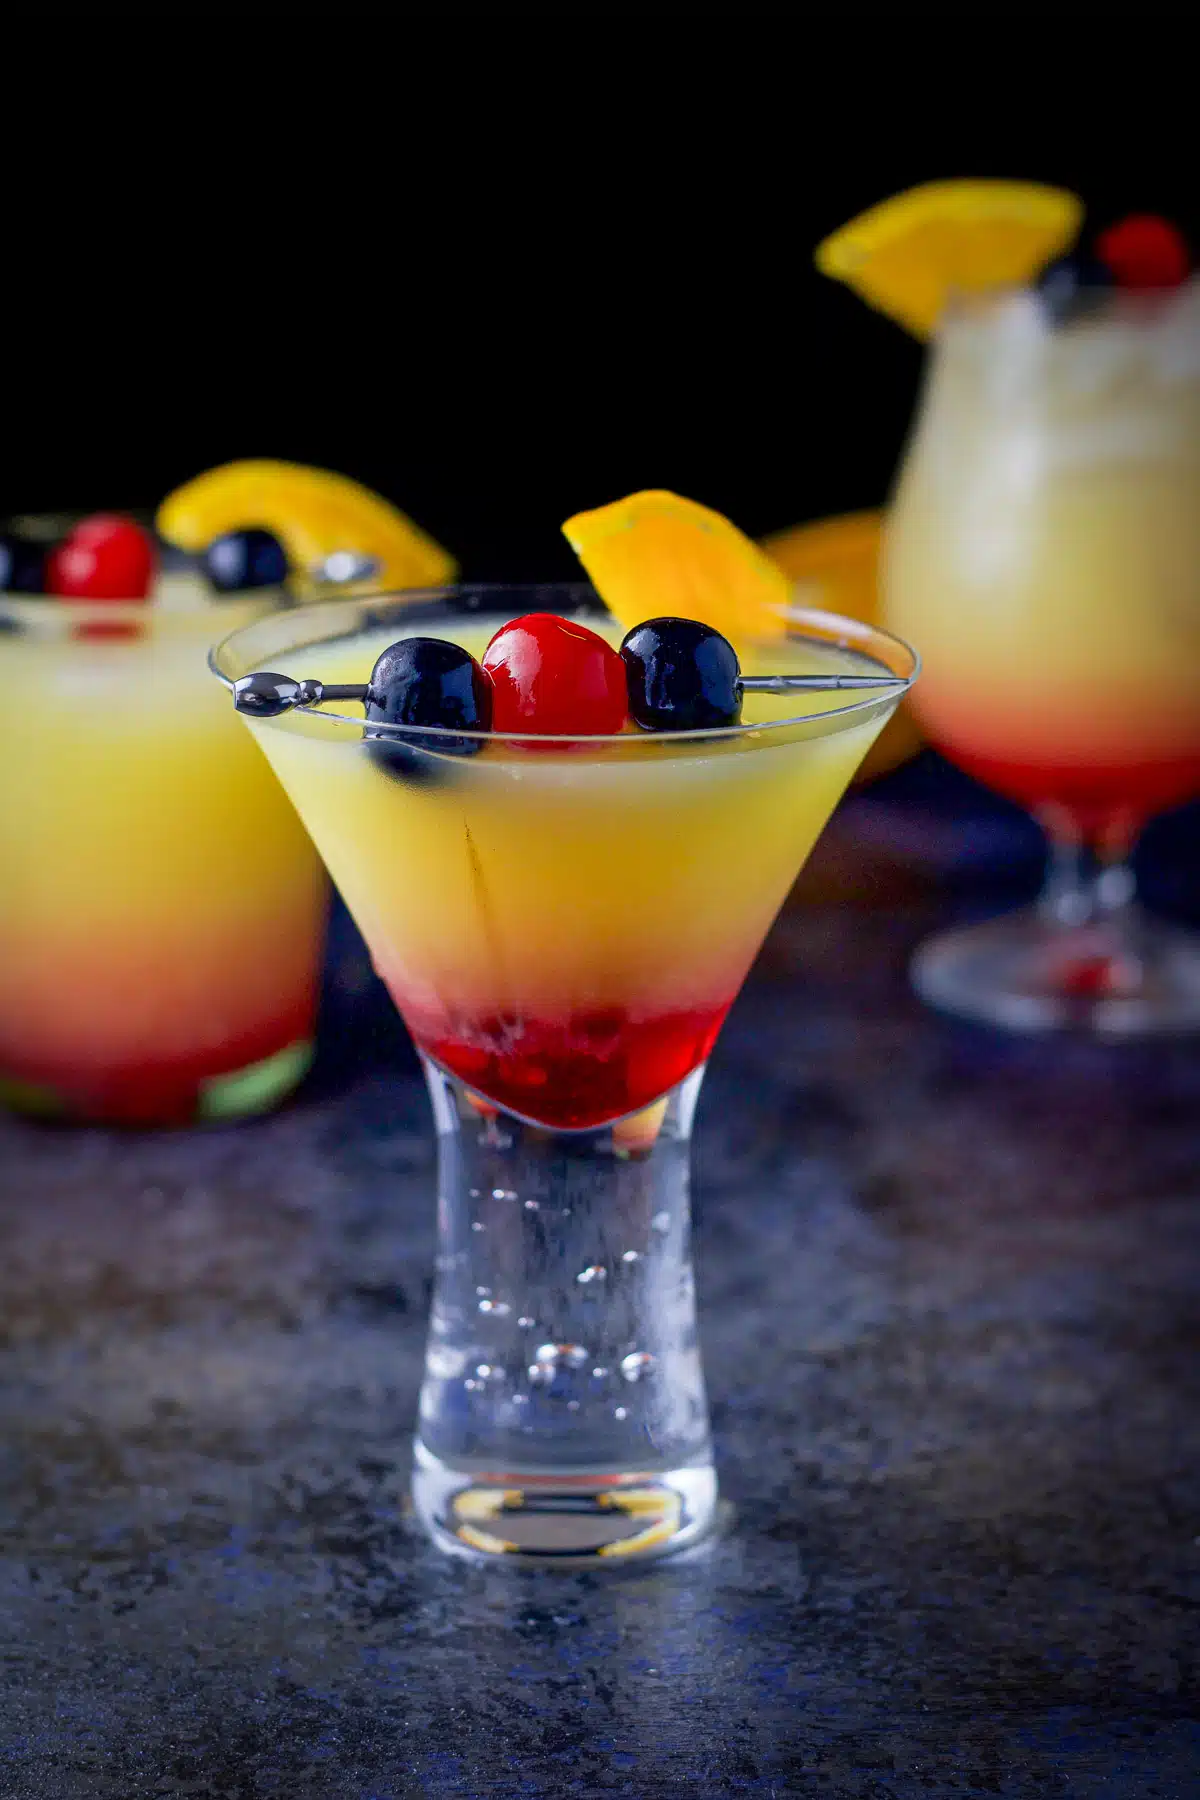 martini glass in front of two other shaped glasses filled with the orange/red cocktail with fruit garnish